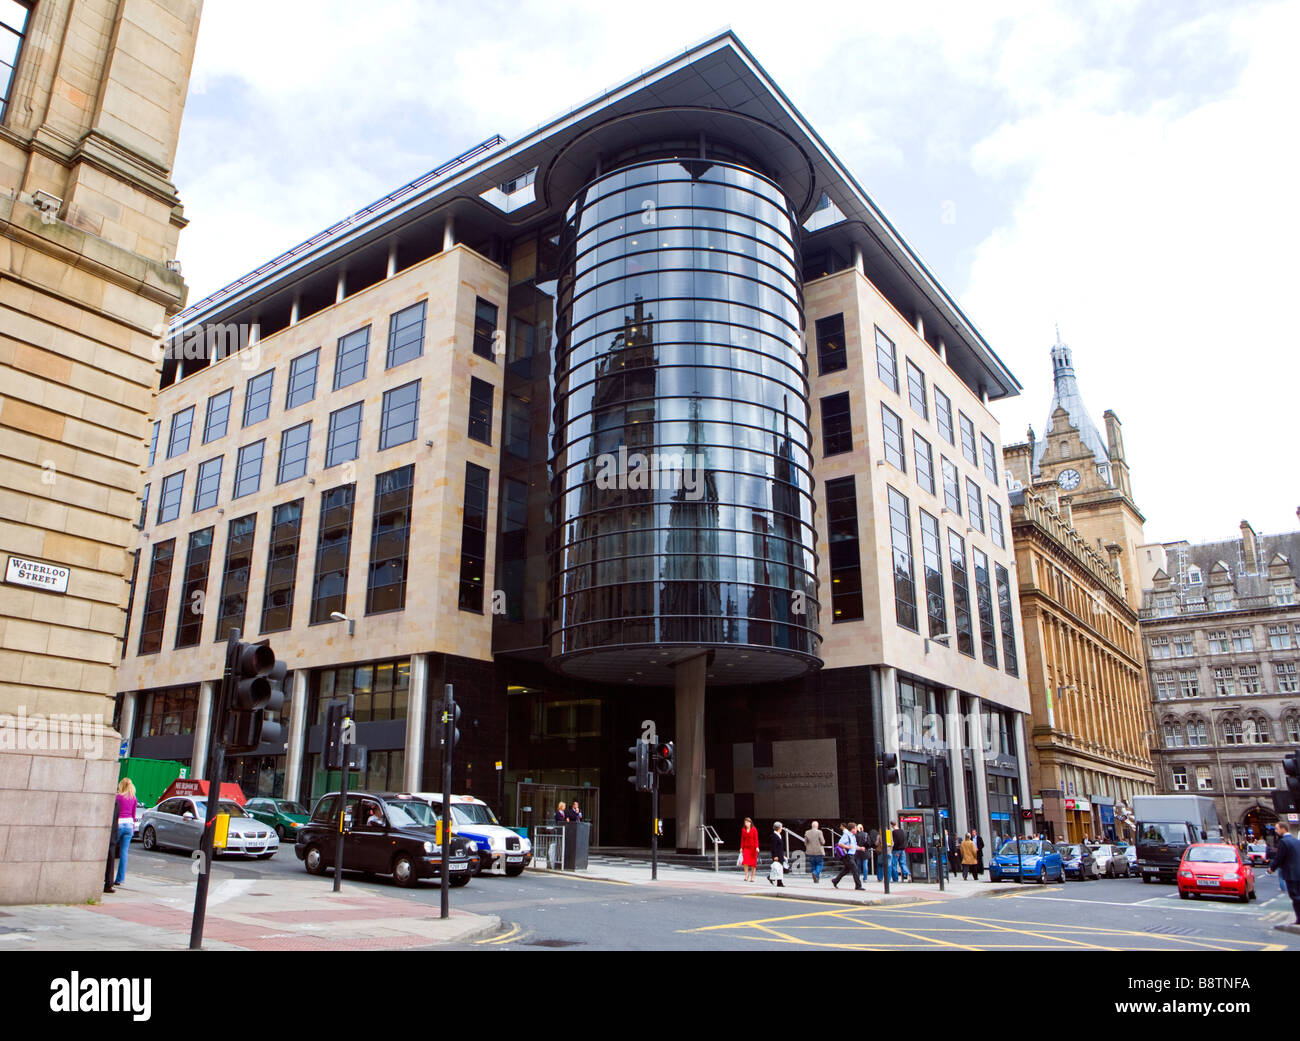 CLYDESDALE BANK HEADQUARTERS IN WATERLOO STREET GLASGOW Stock Photo